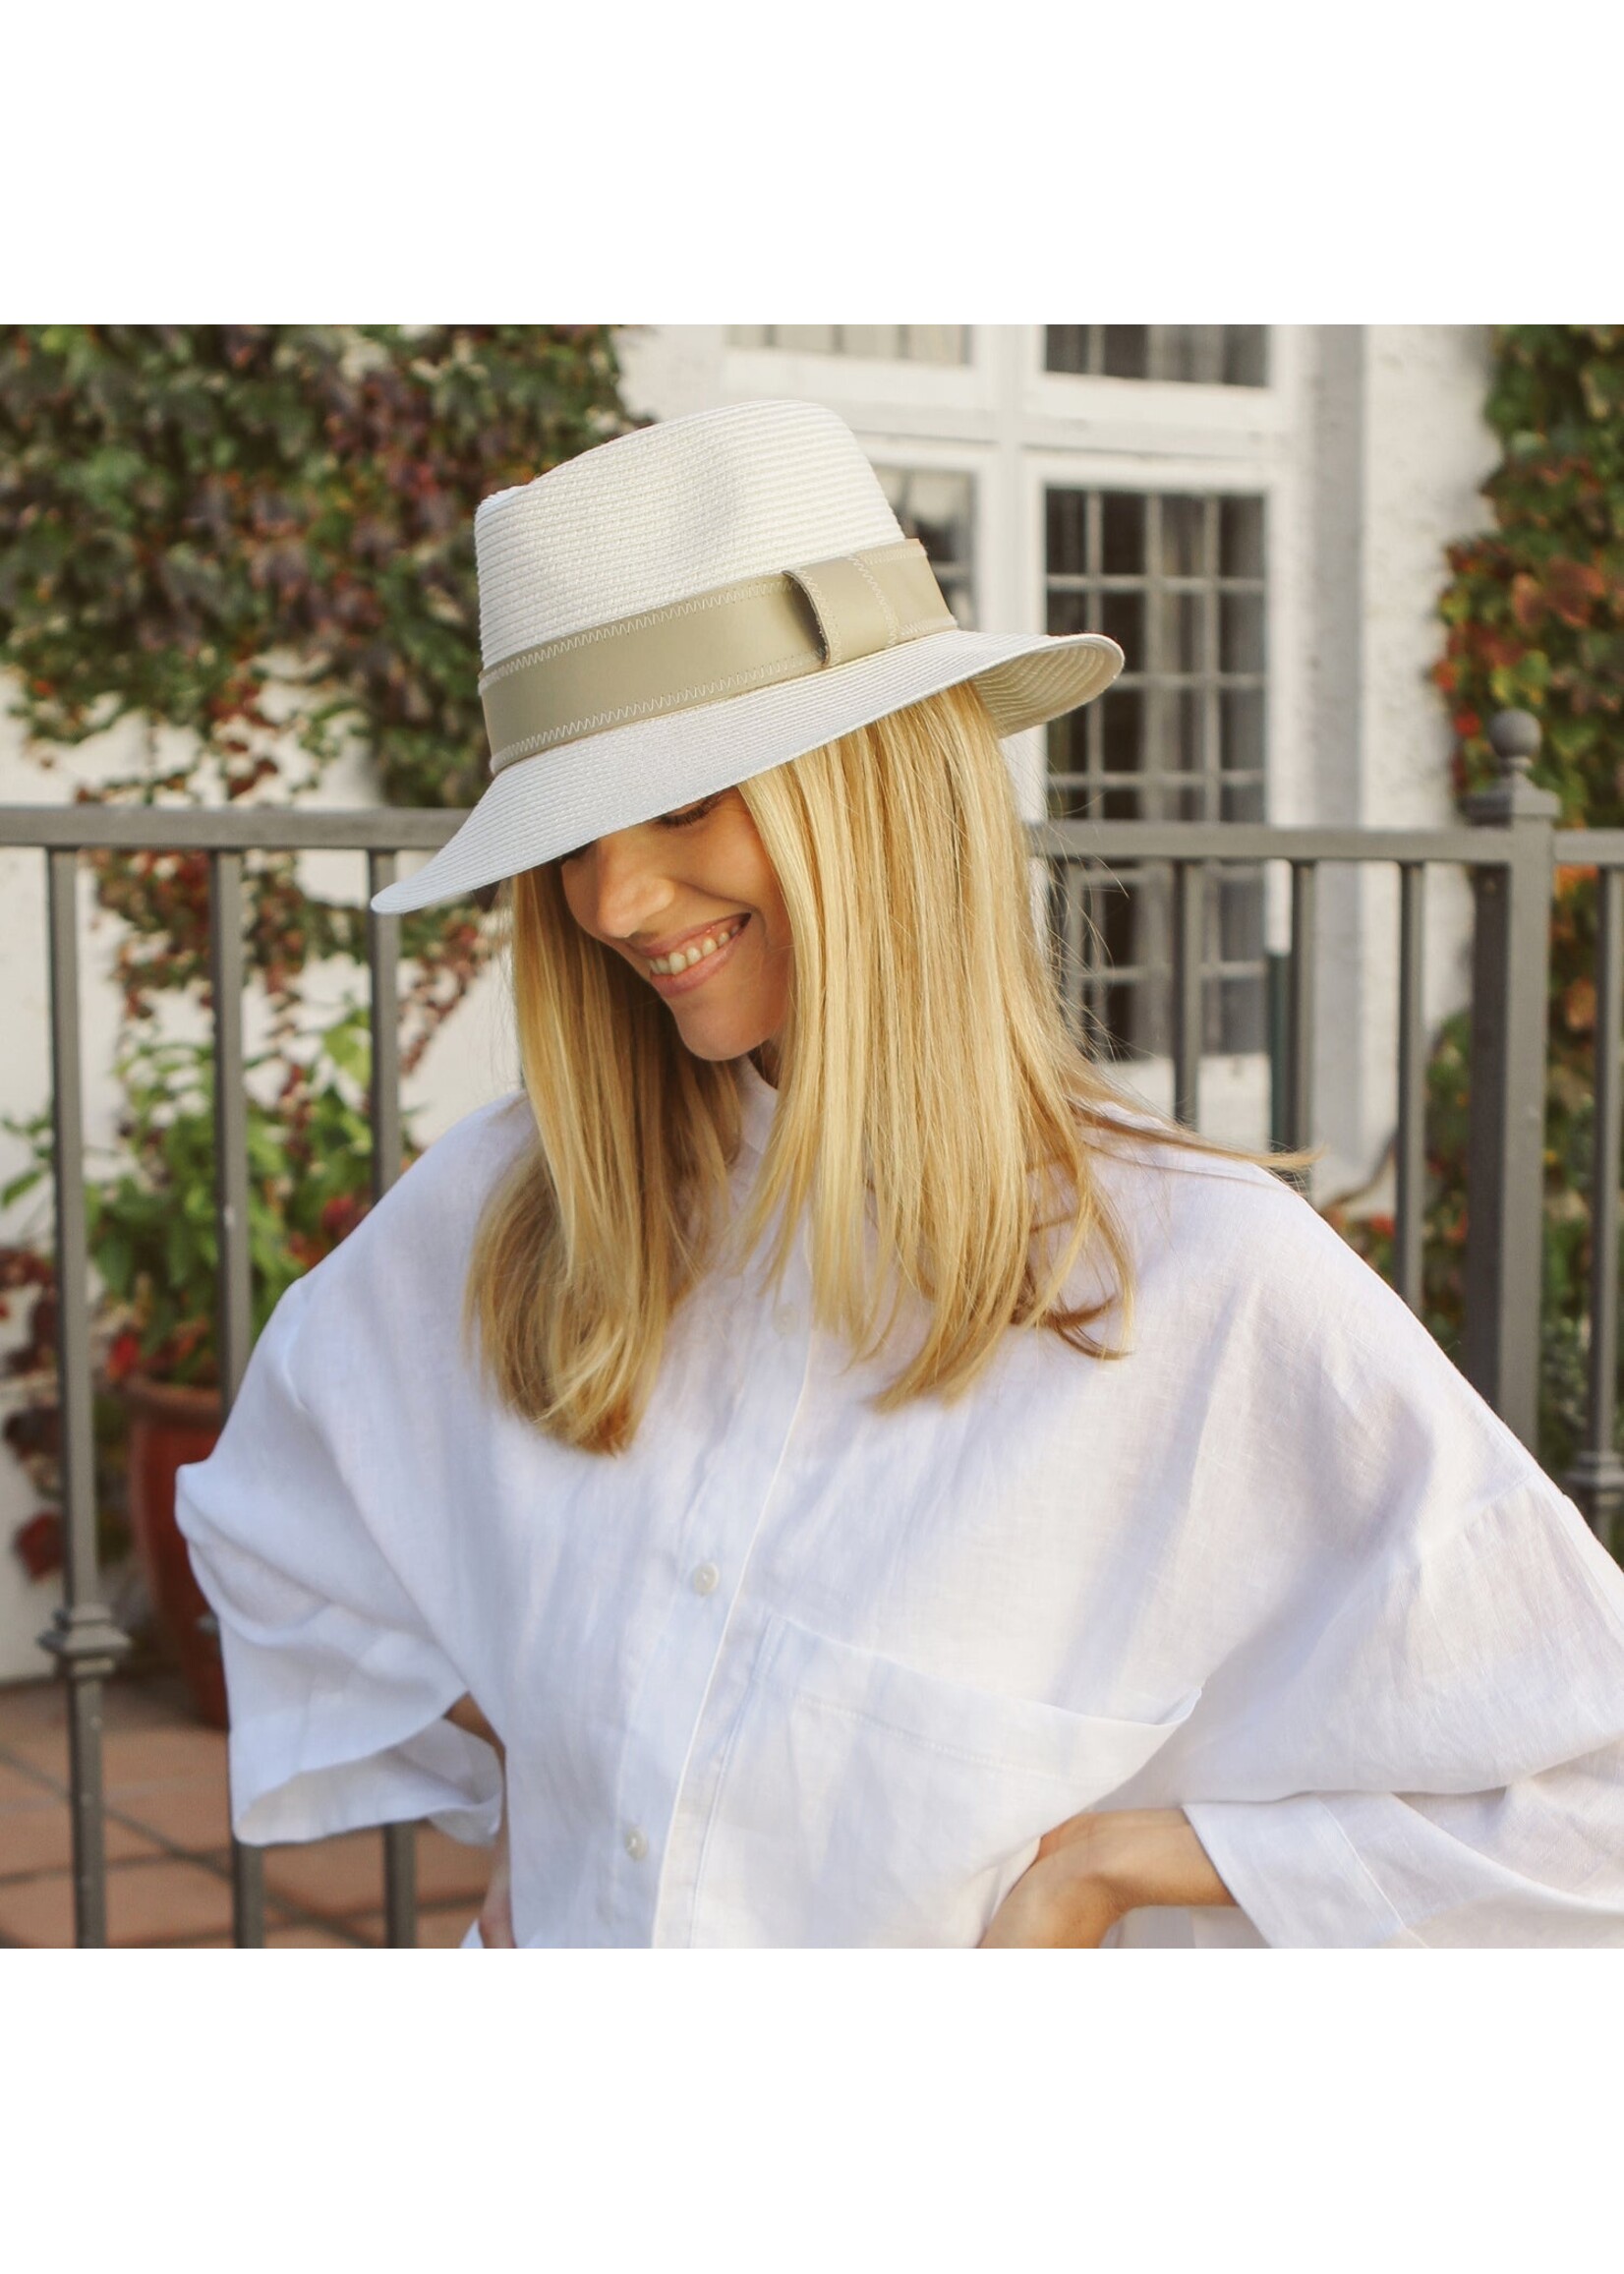 House of Ord - Cape Town Harper Fedora Ivory